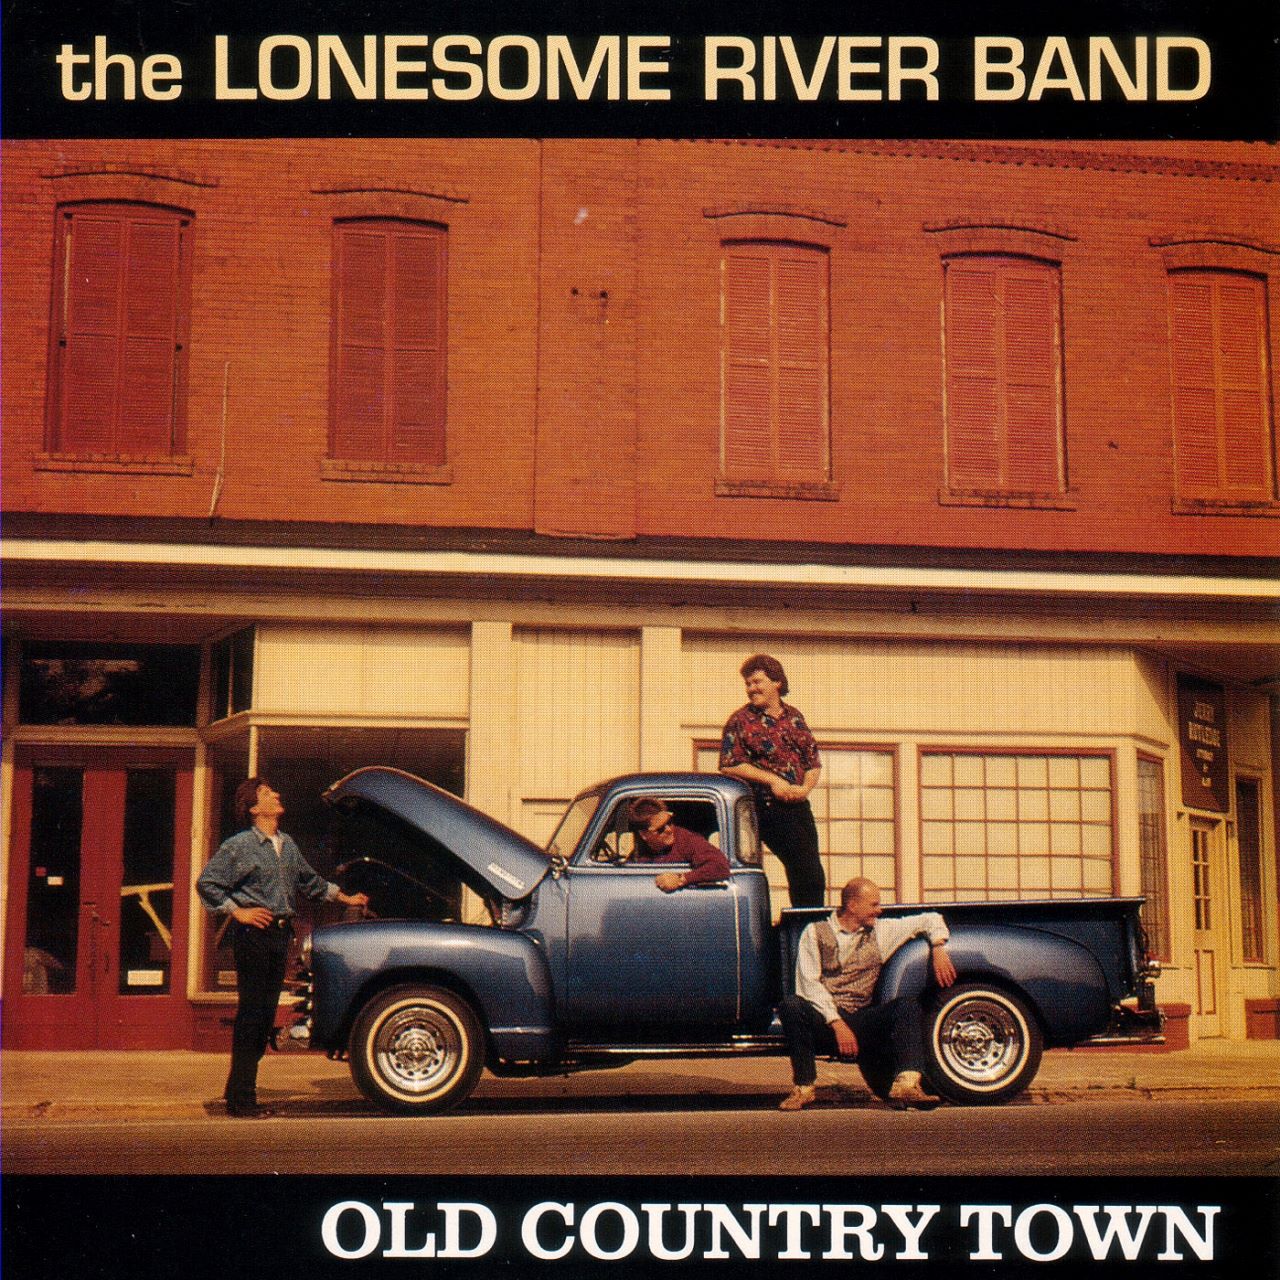 Lonesome River Band - Old Country Town cover album